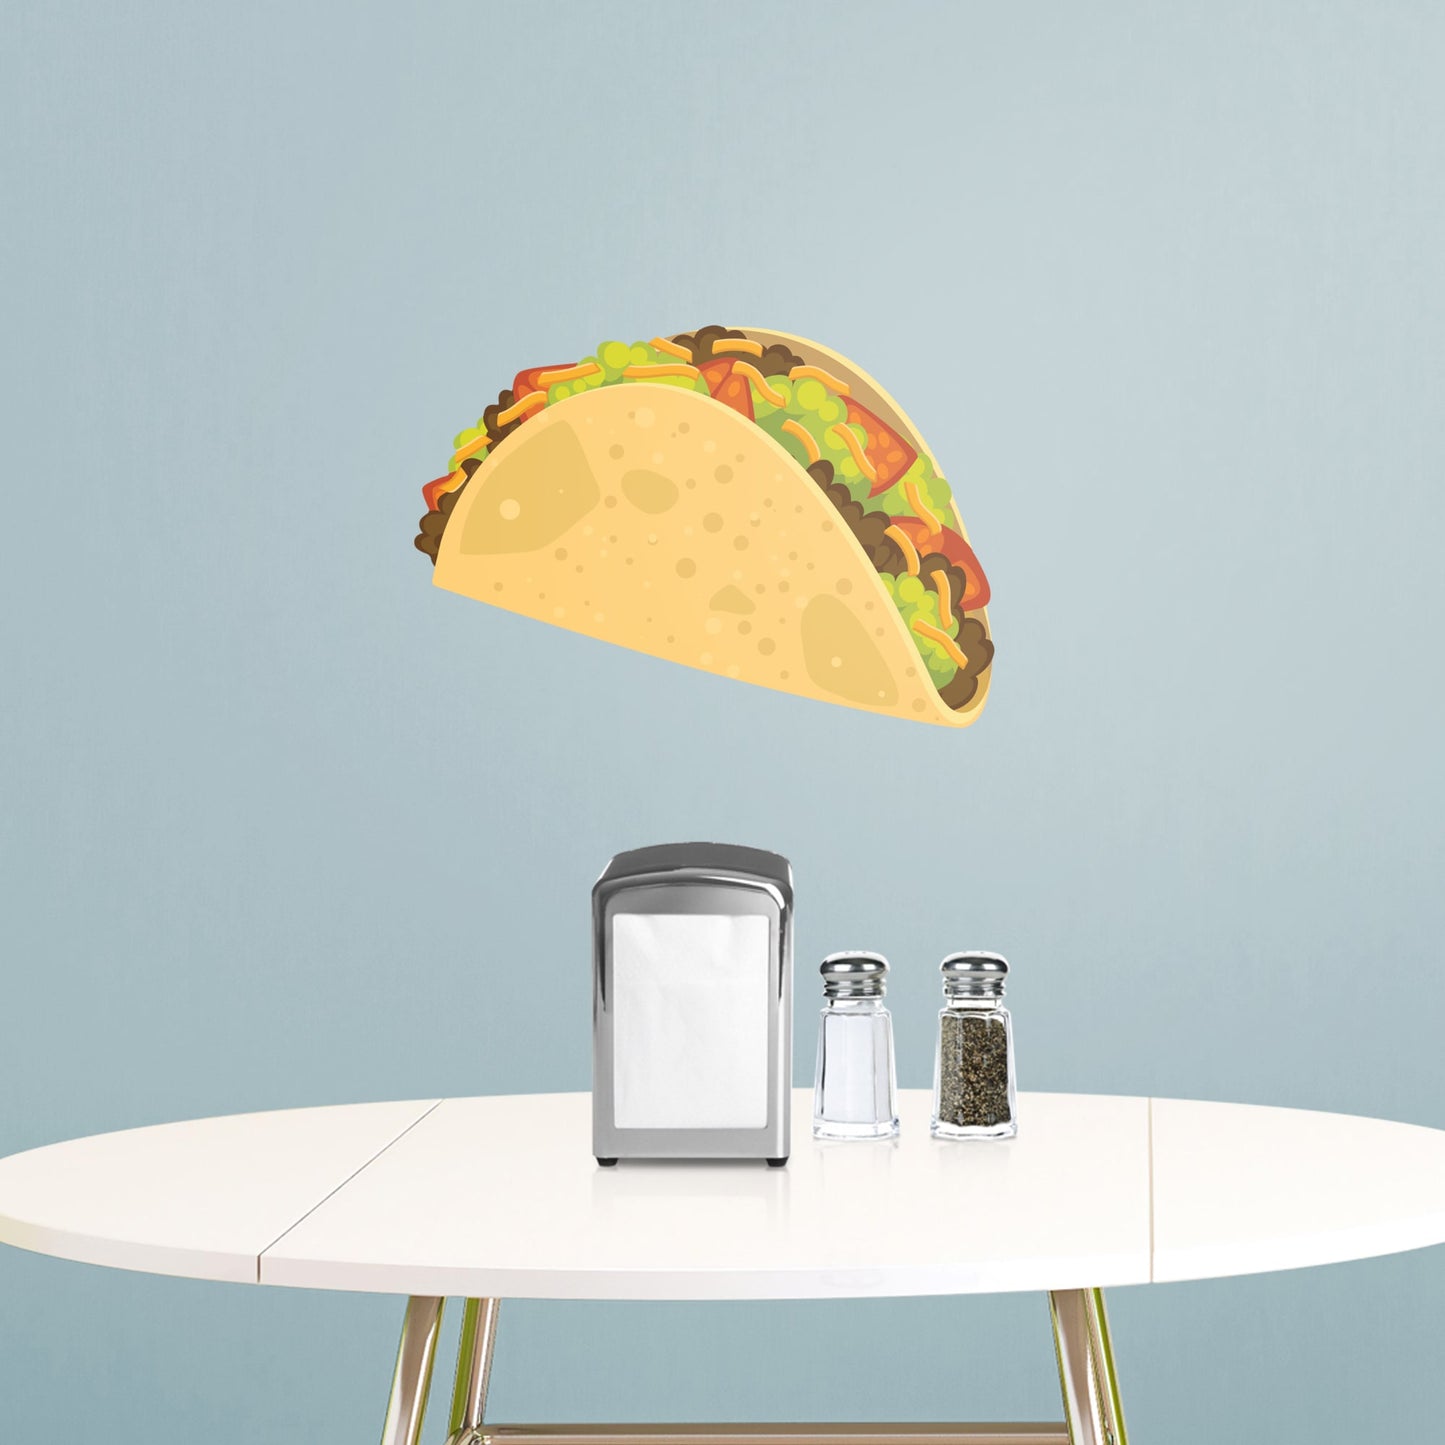 Giant Taco + 2 Decals (49"W x 34"H)